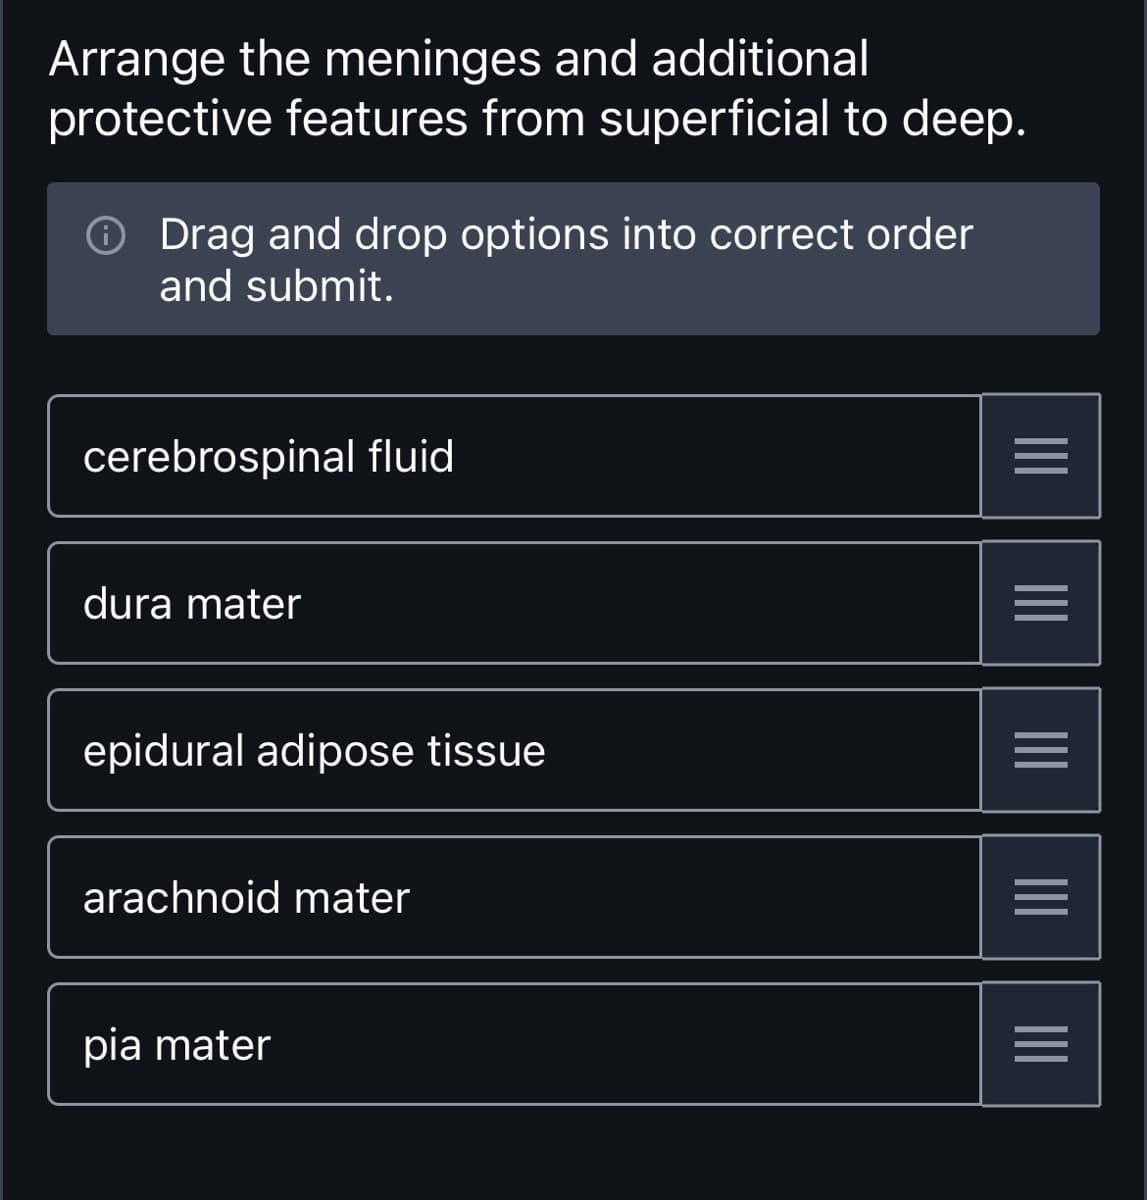 Arrange the meninges and additional
protective features from superficial to deep.
Drag and drop options into correct order
and submit.
cerebrospinal fluid
dura mater
epidural adipose tissue
arachnoid mater
pia mater
|||
=
|||
|||
|||
=